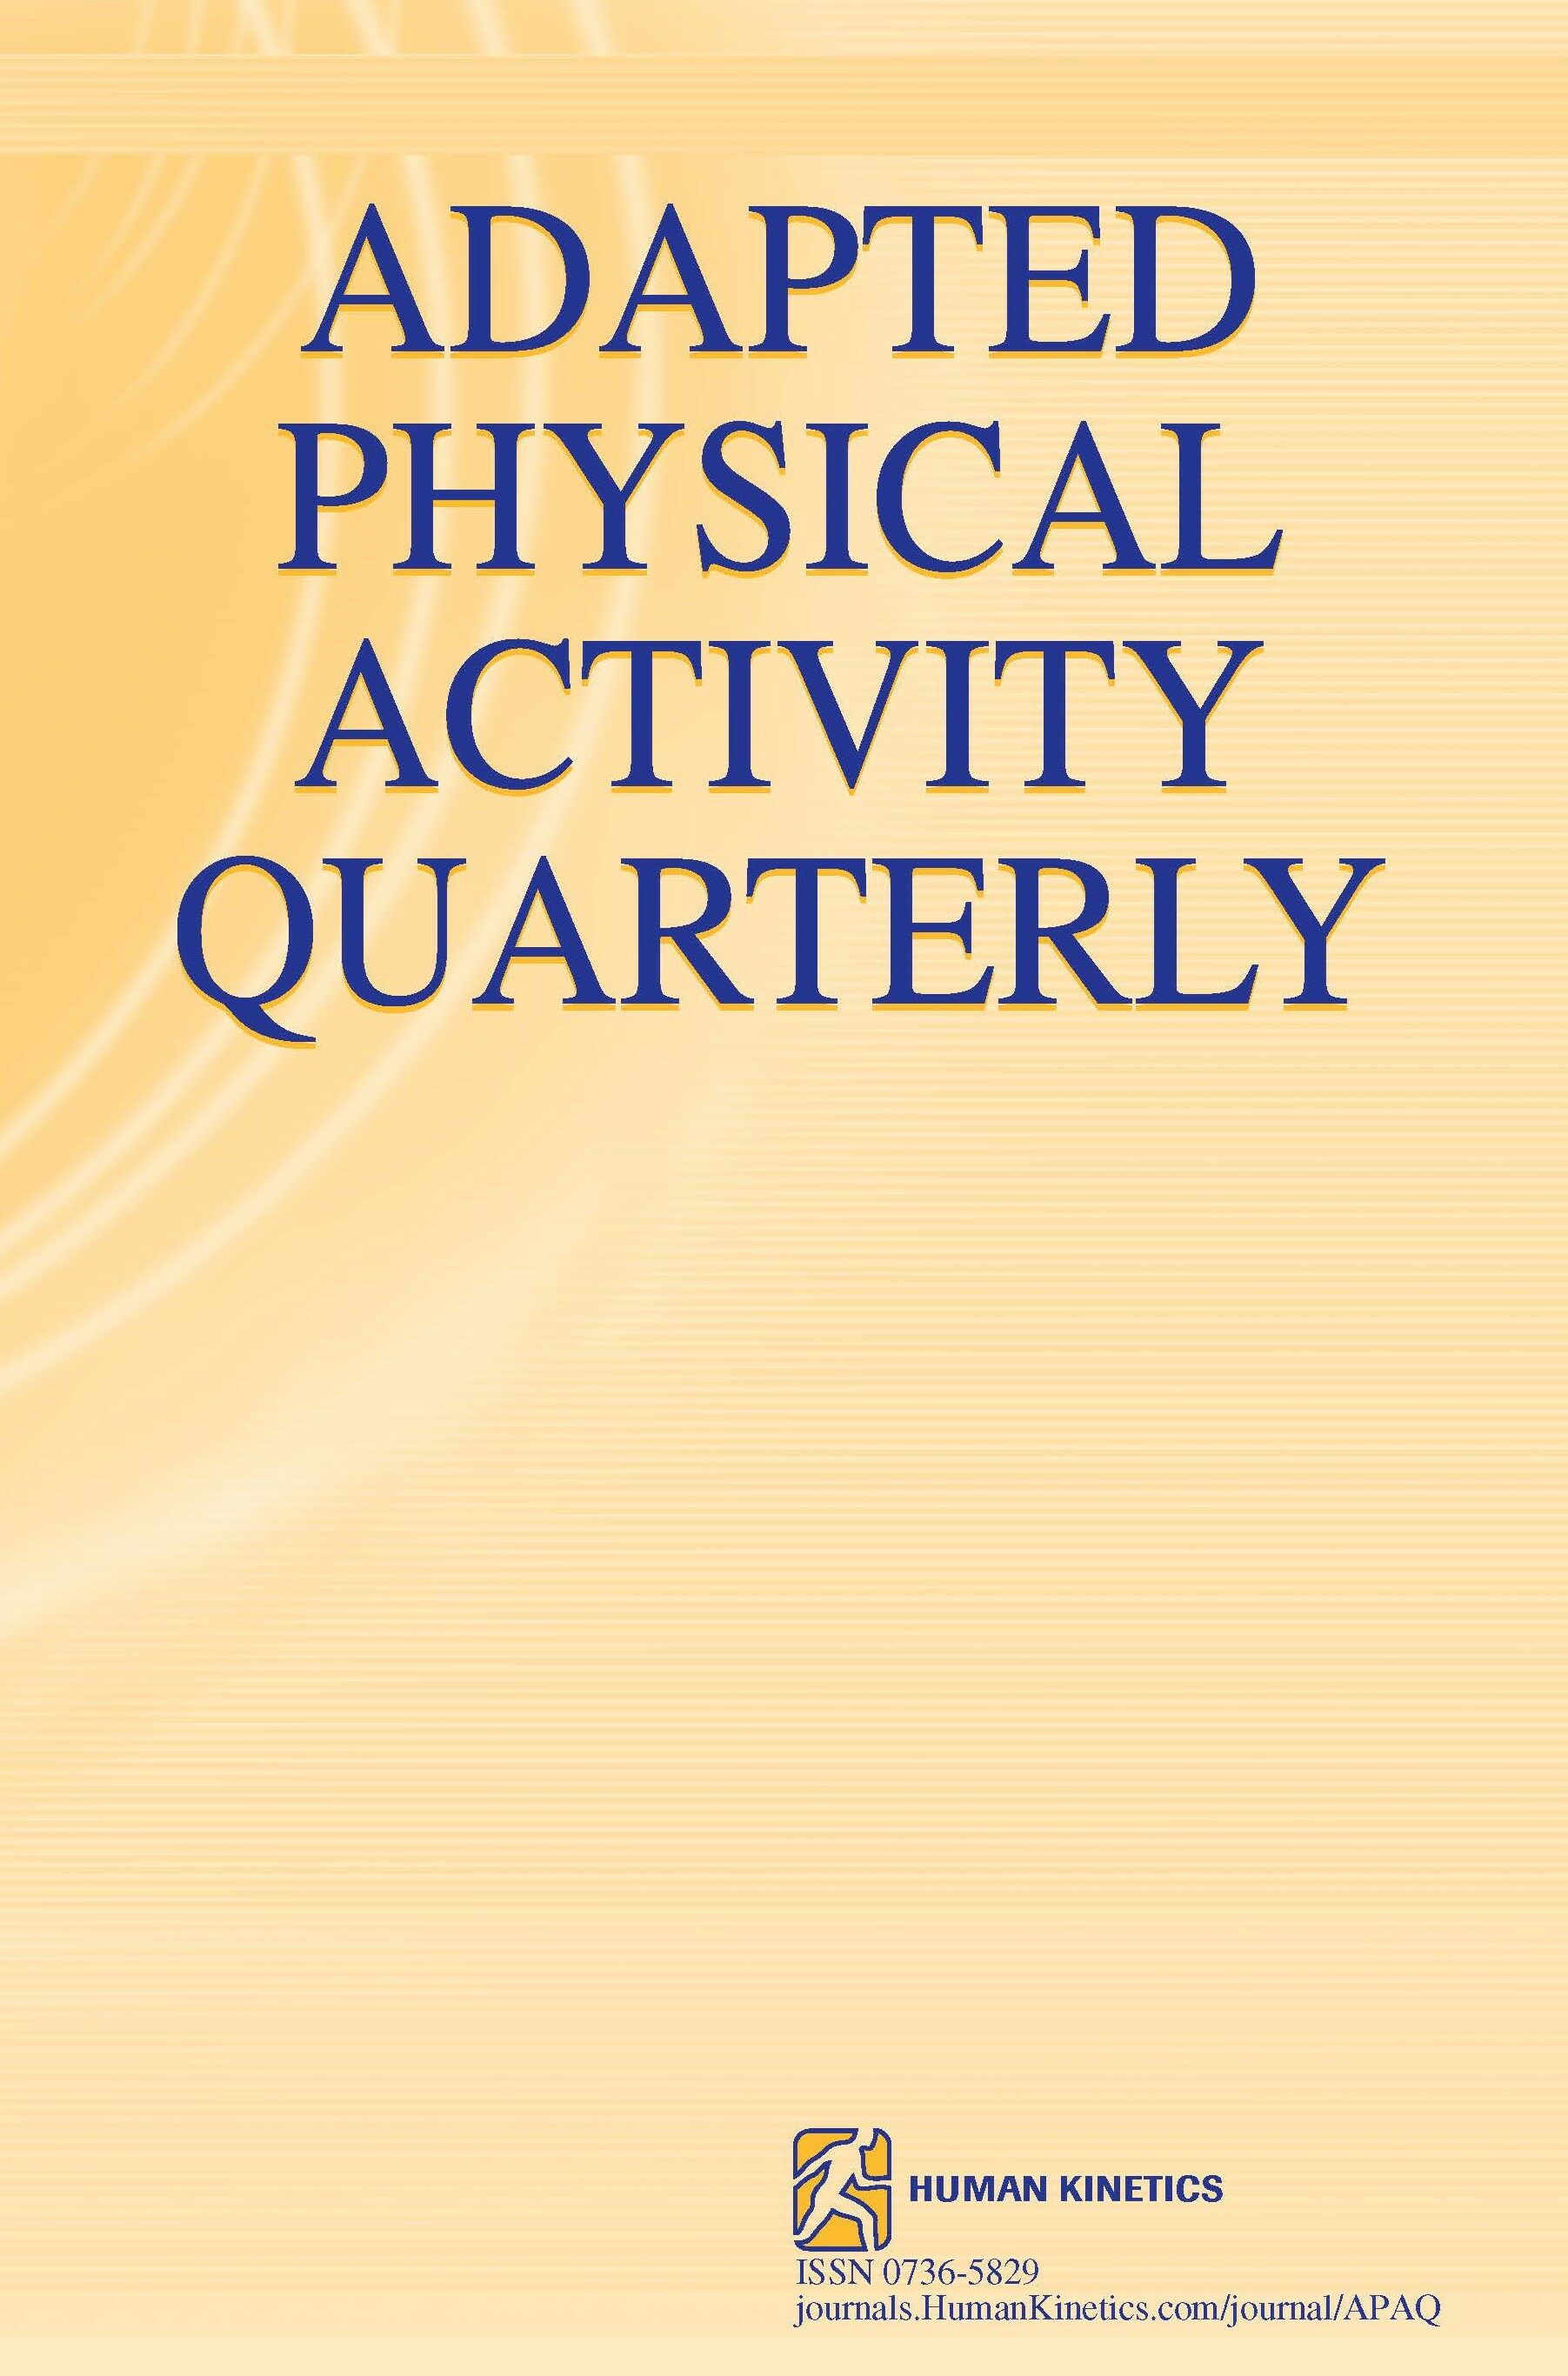 Accessible Guide for People With Intellectual Disabilities in a Fitness Environment: A Delphi Study